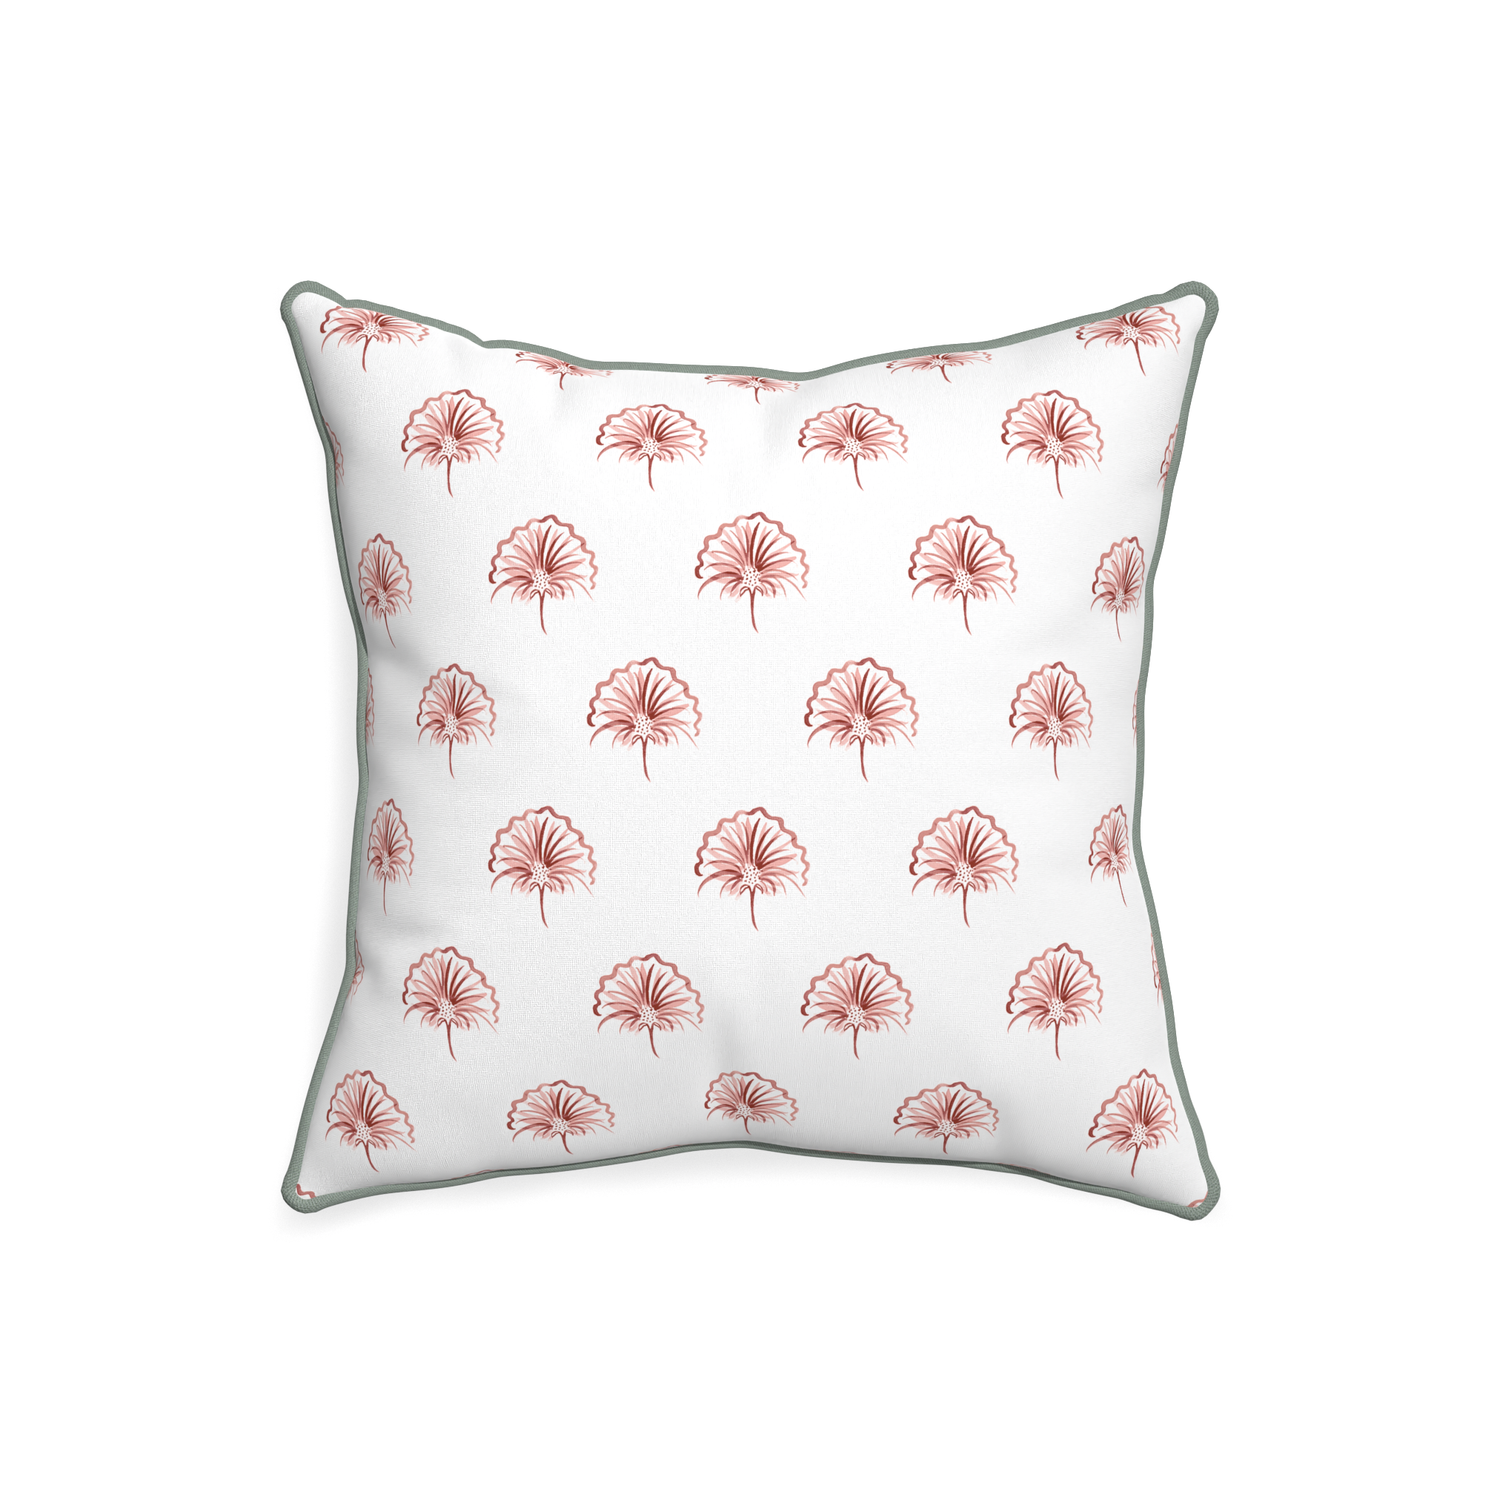 20-square penelope rose custom floral pinkpillow with sage piping on white background